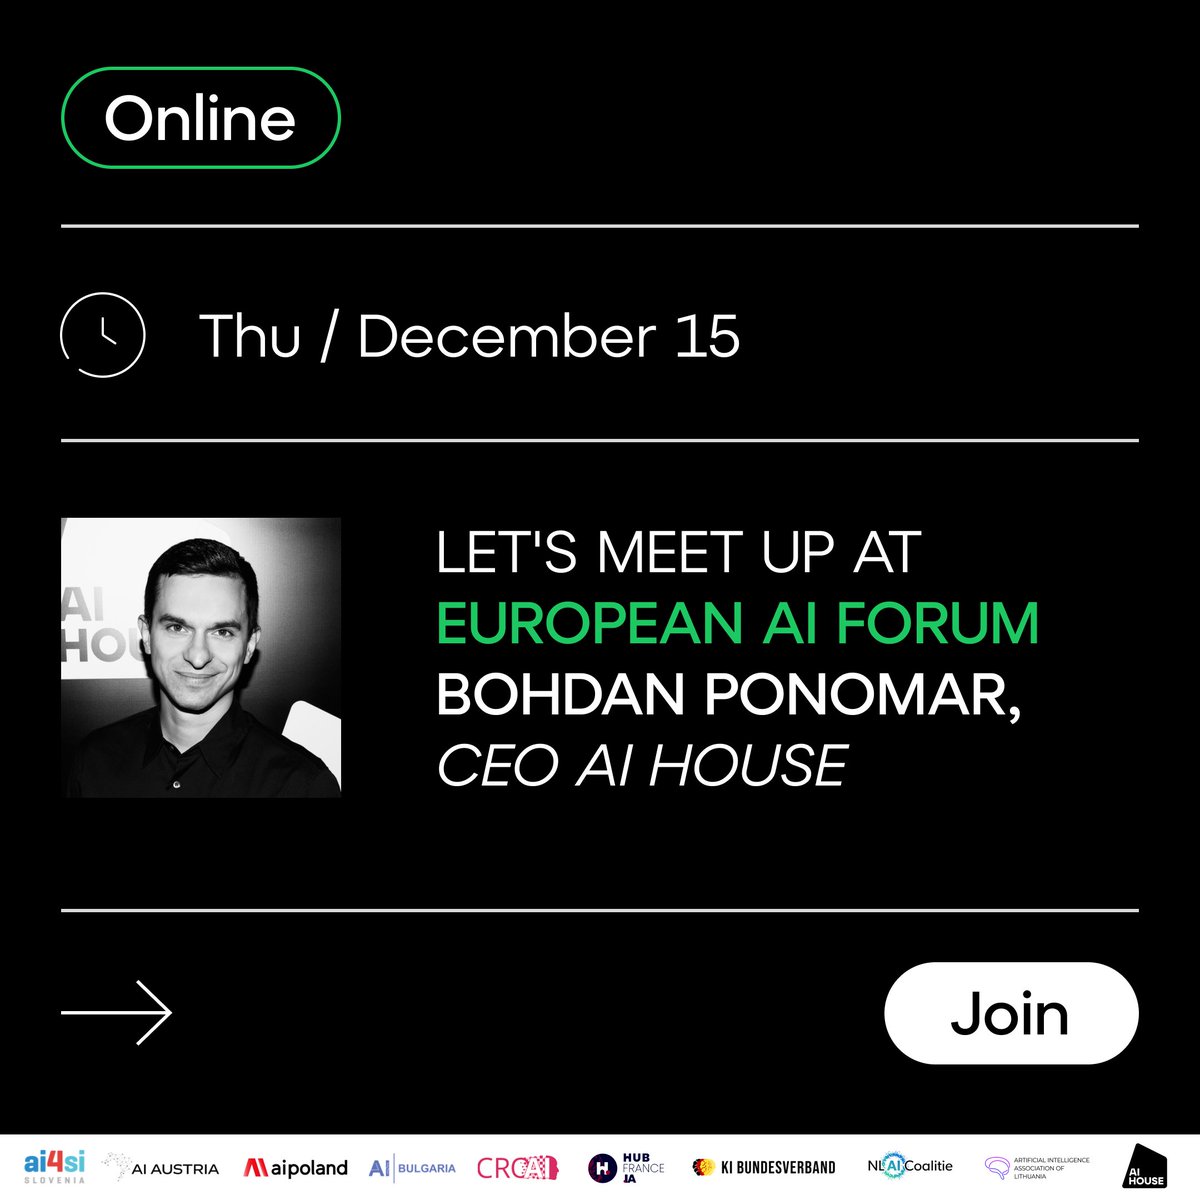 The European AI Forum is coming! Join to listen to a live talk about the Ukrainian AI sector and our community, by @BPonomar, CEO AI HOUSE.

When? December 15th. The speech by Bohdan Ponomar will be between 10:30-11:00 CET.

Participation is free. Join: european-ai-forum.com